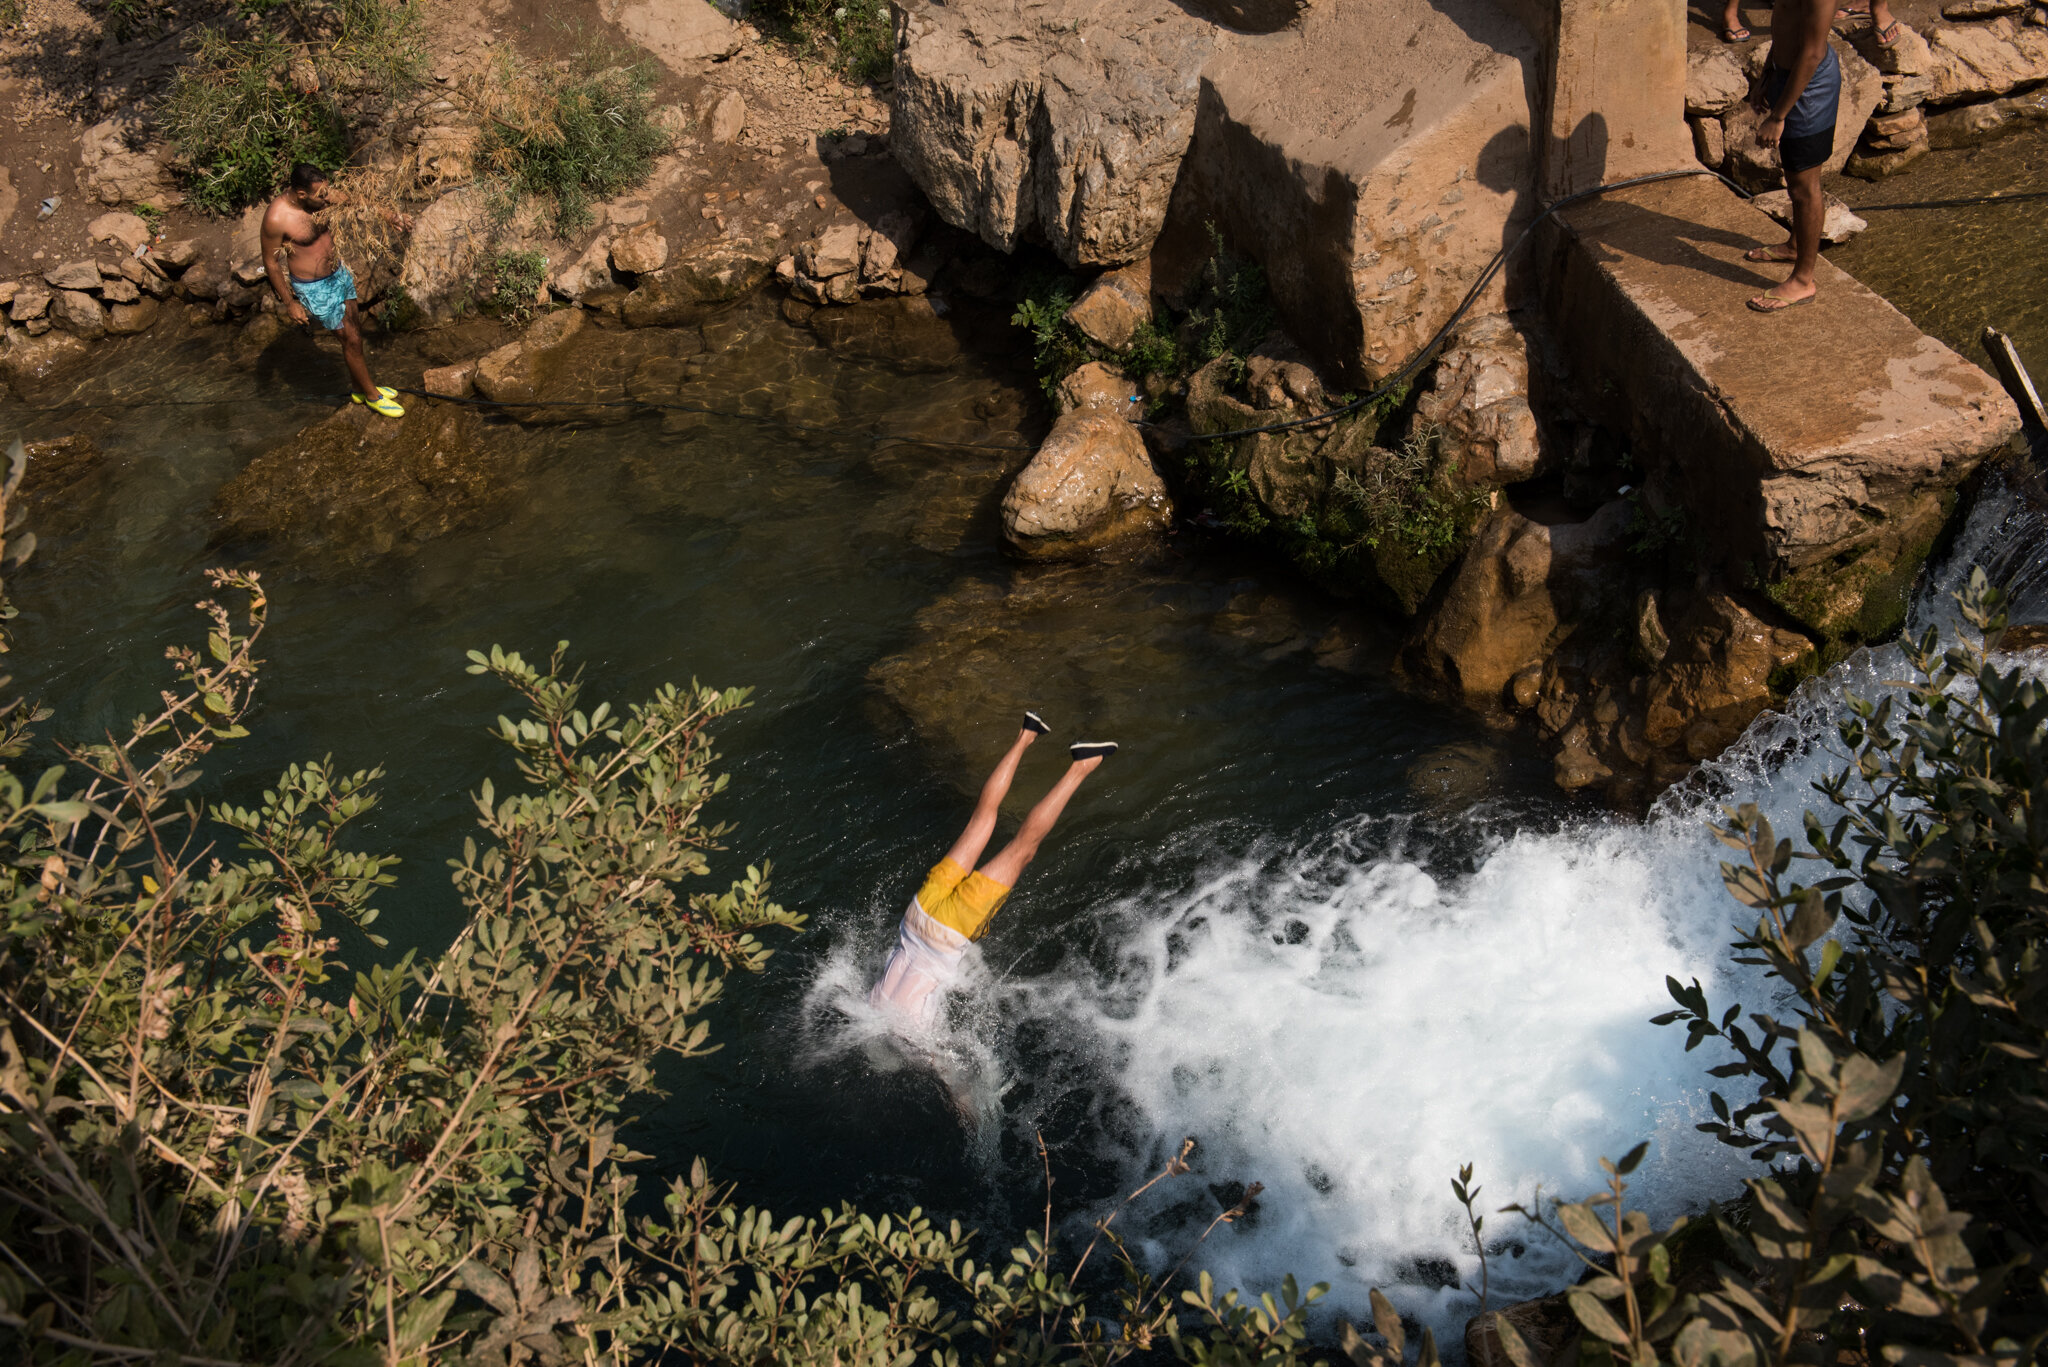    Morocco - Akchour     Boy jumping into river 